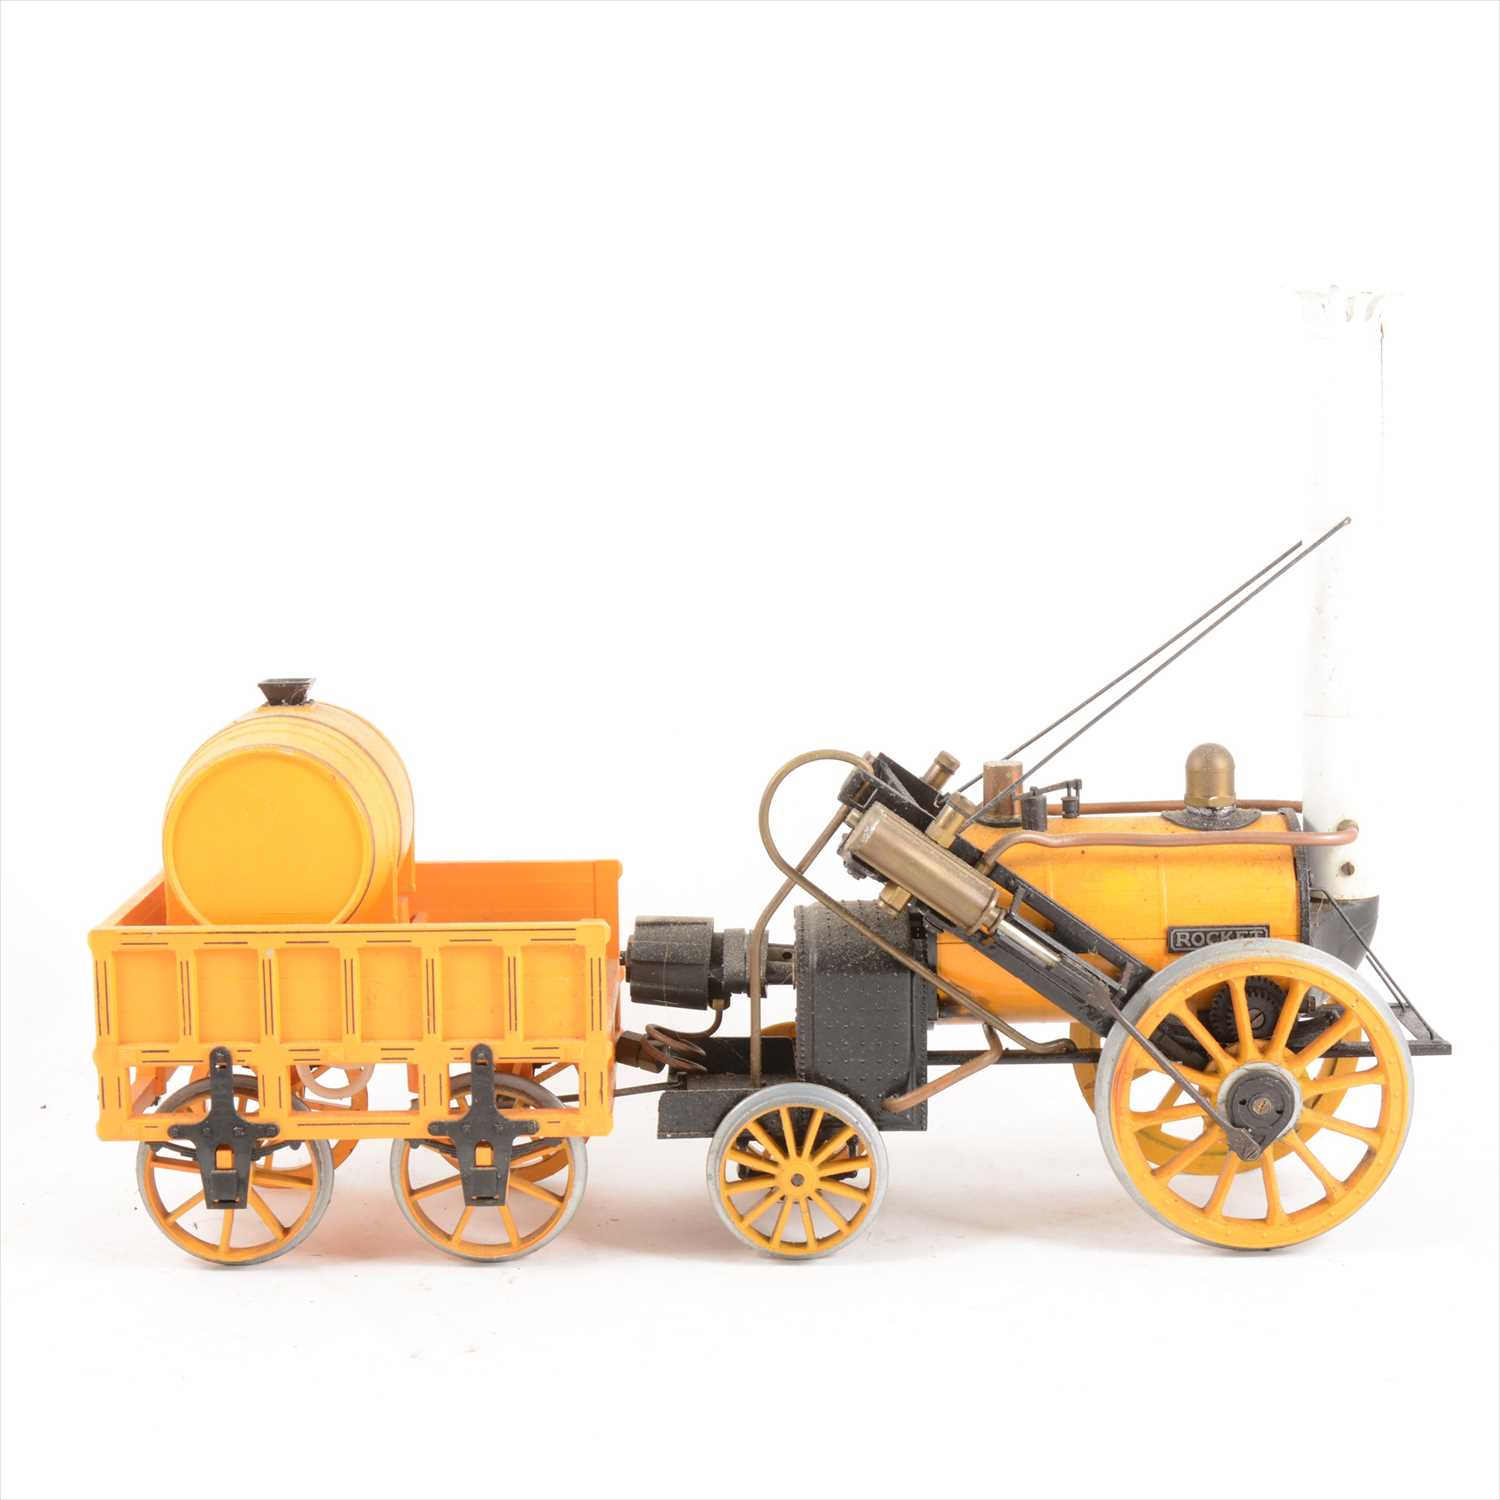 Lot 35 - Hornby 3 1/2inch gauge live steam Stephenson Rocket locomotive with wagon, 42cm total length, unboxed.